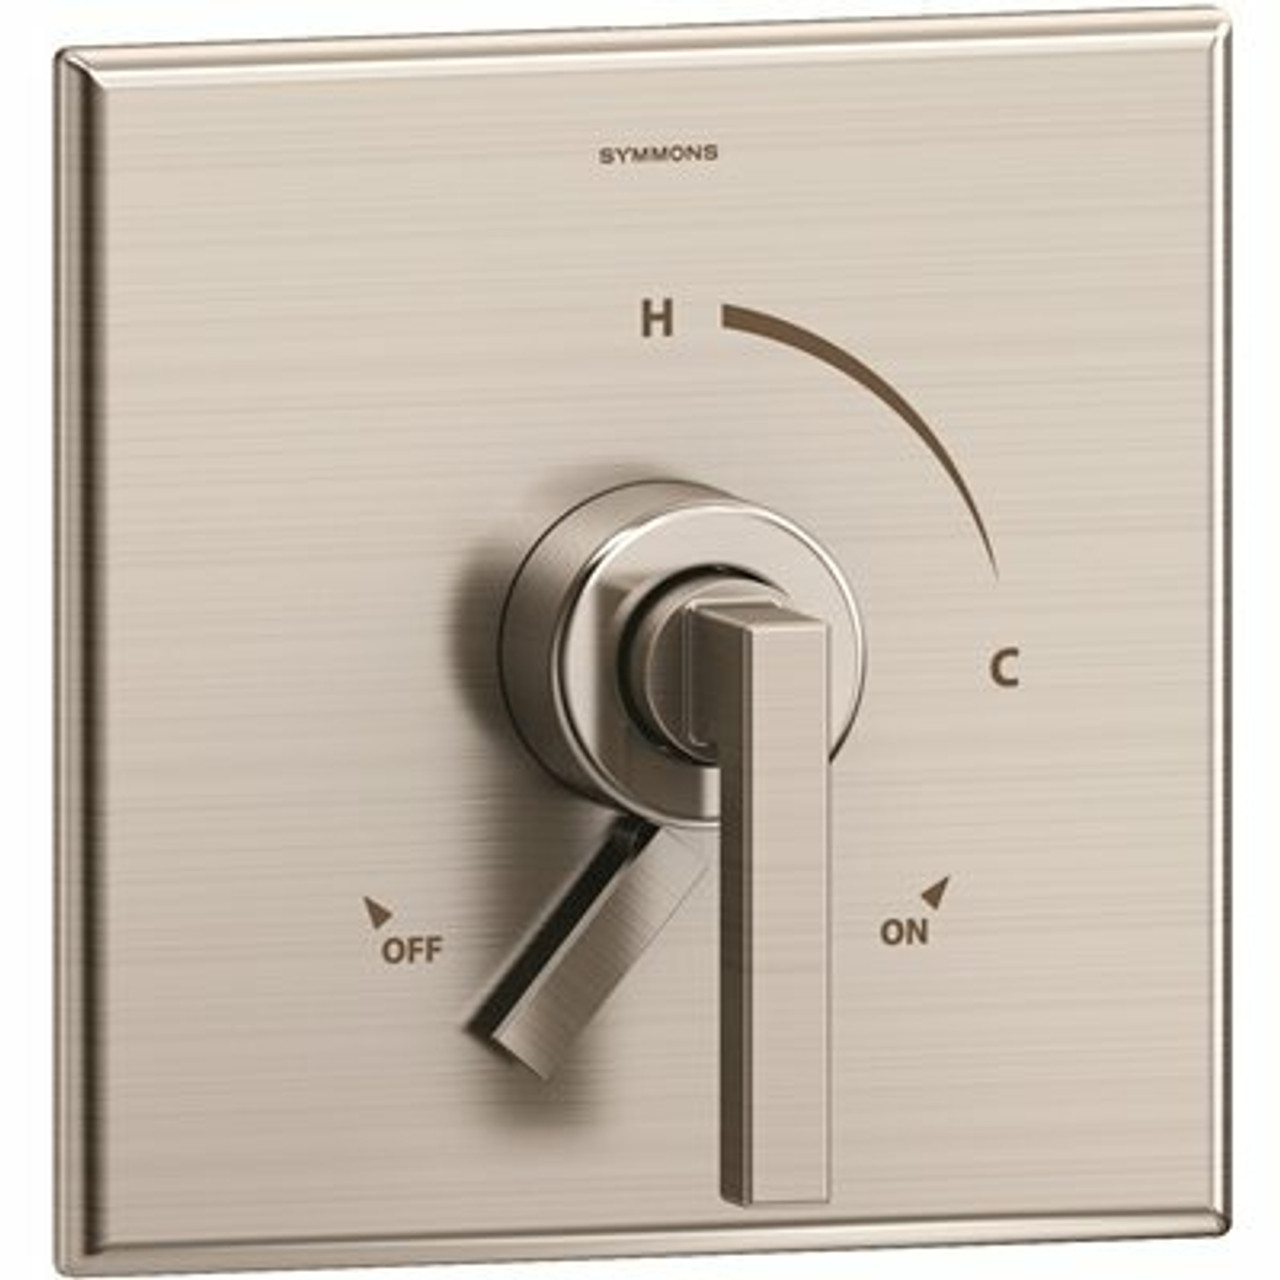 Symmons Duro 1-Handle Wall-Mounted Valve Trim Kit In Satin Nickel With Volume Control (Valve Not Included)